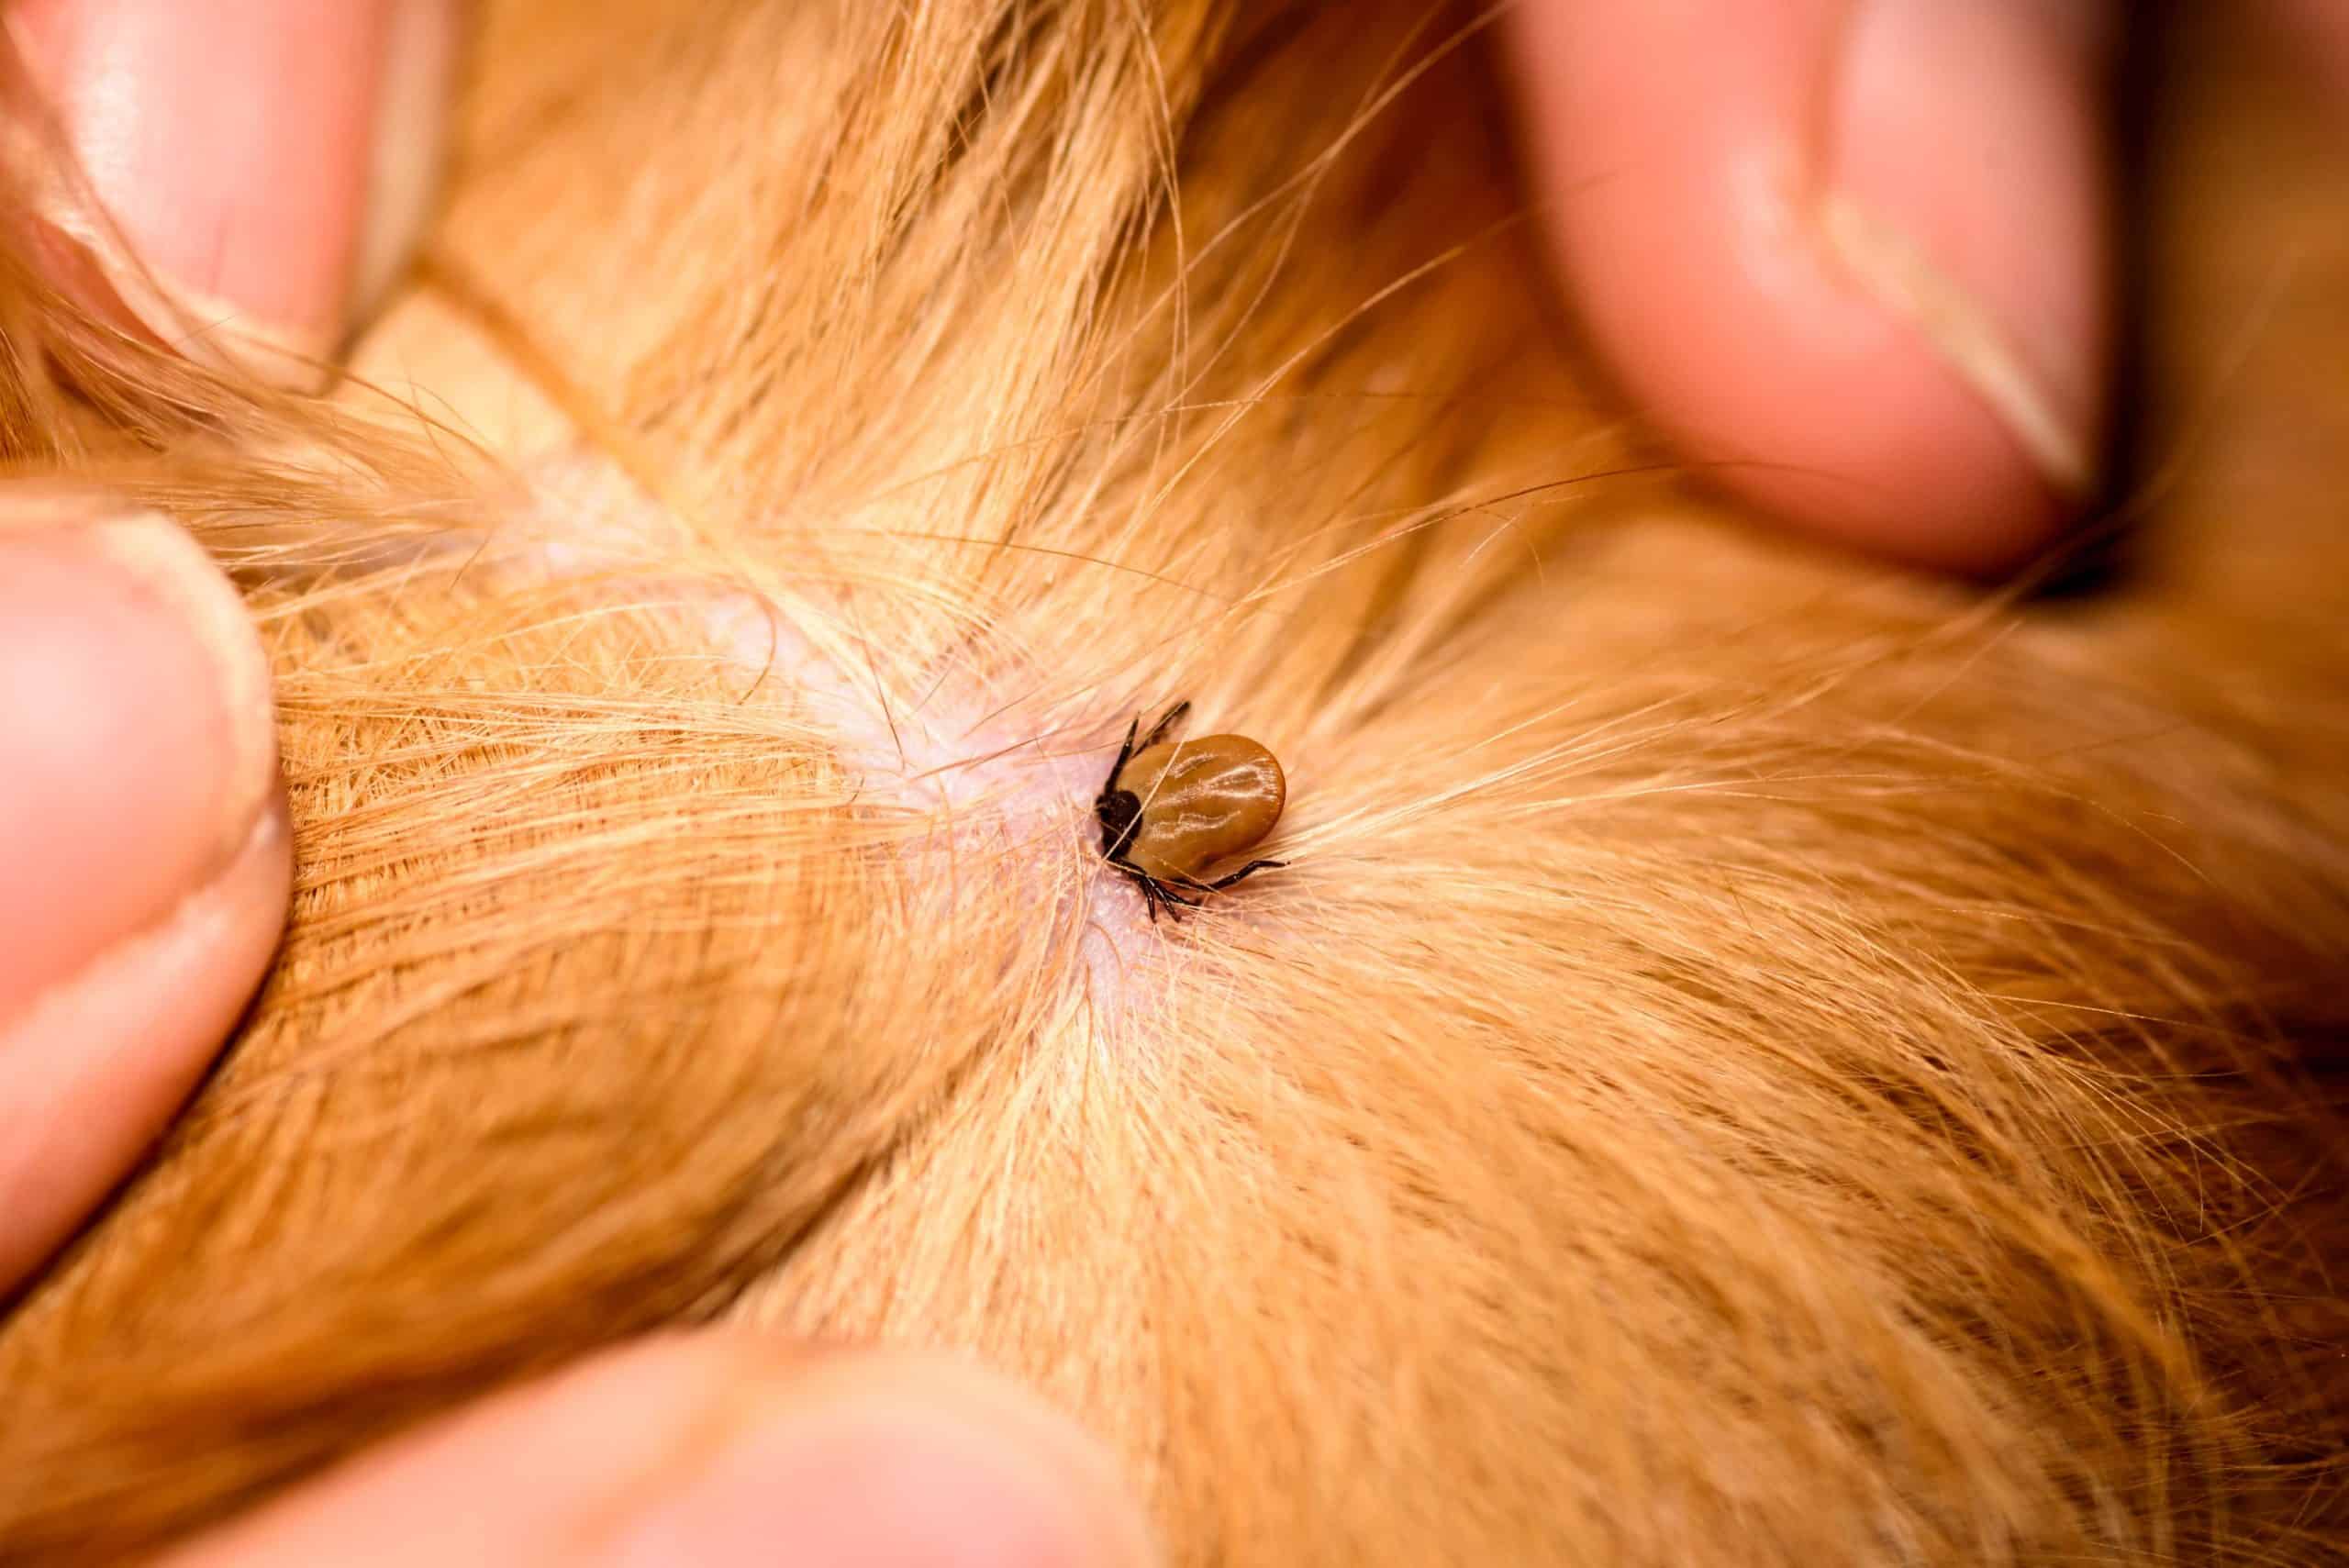 Ticks, Lyme Disease, and the Risks to Your Pet